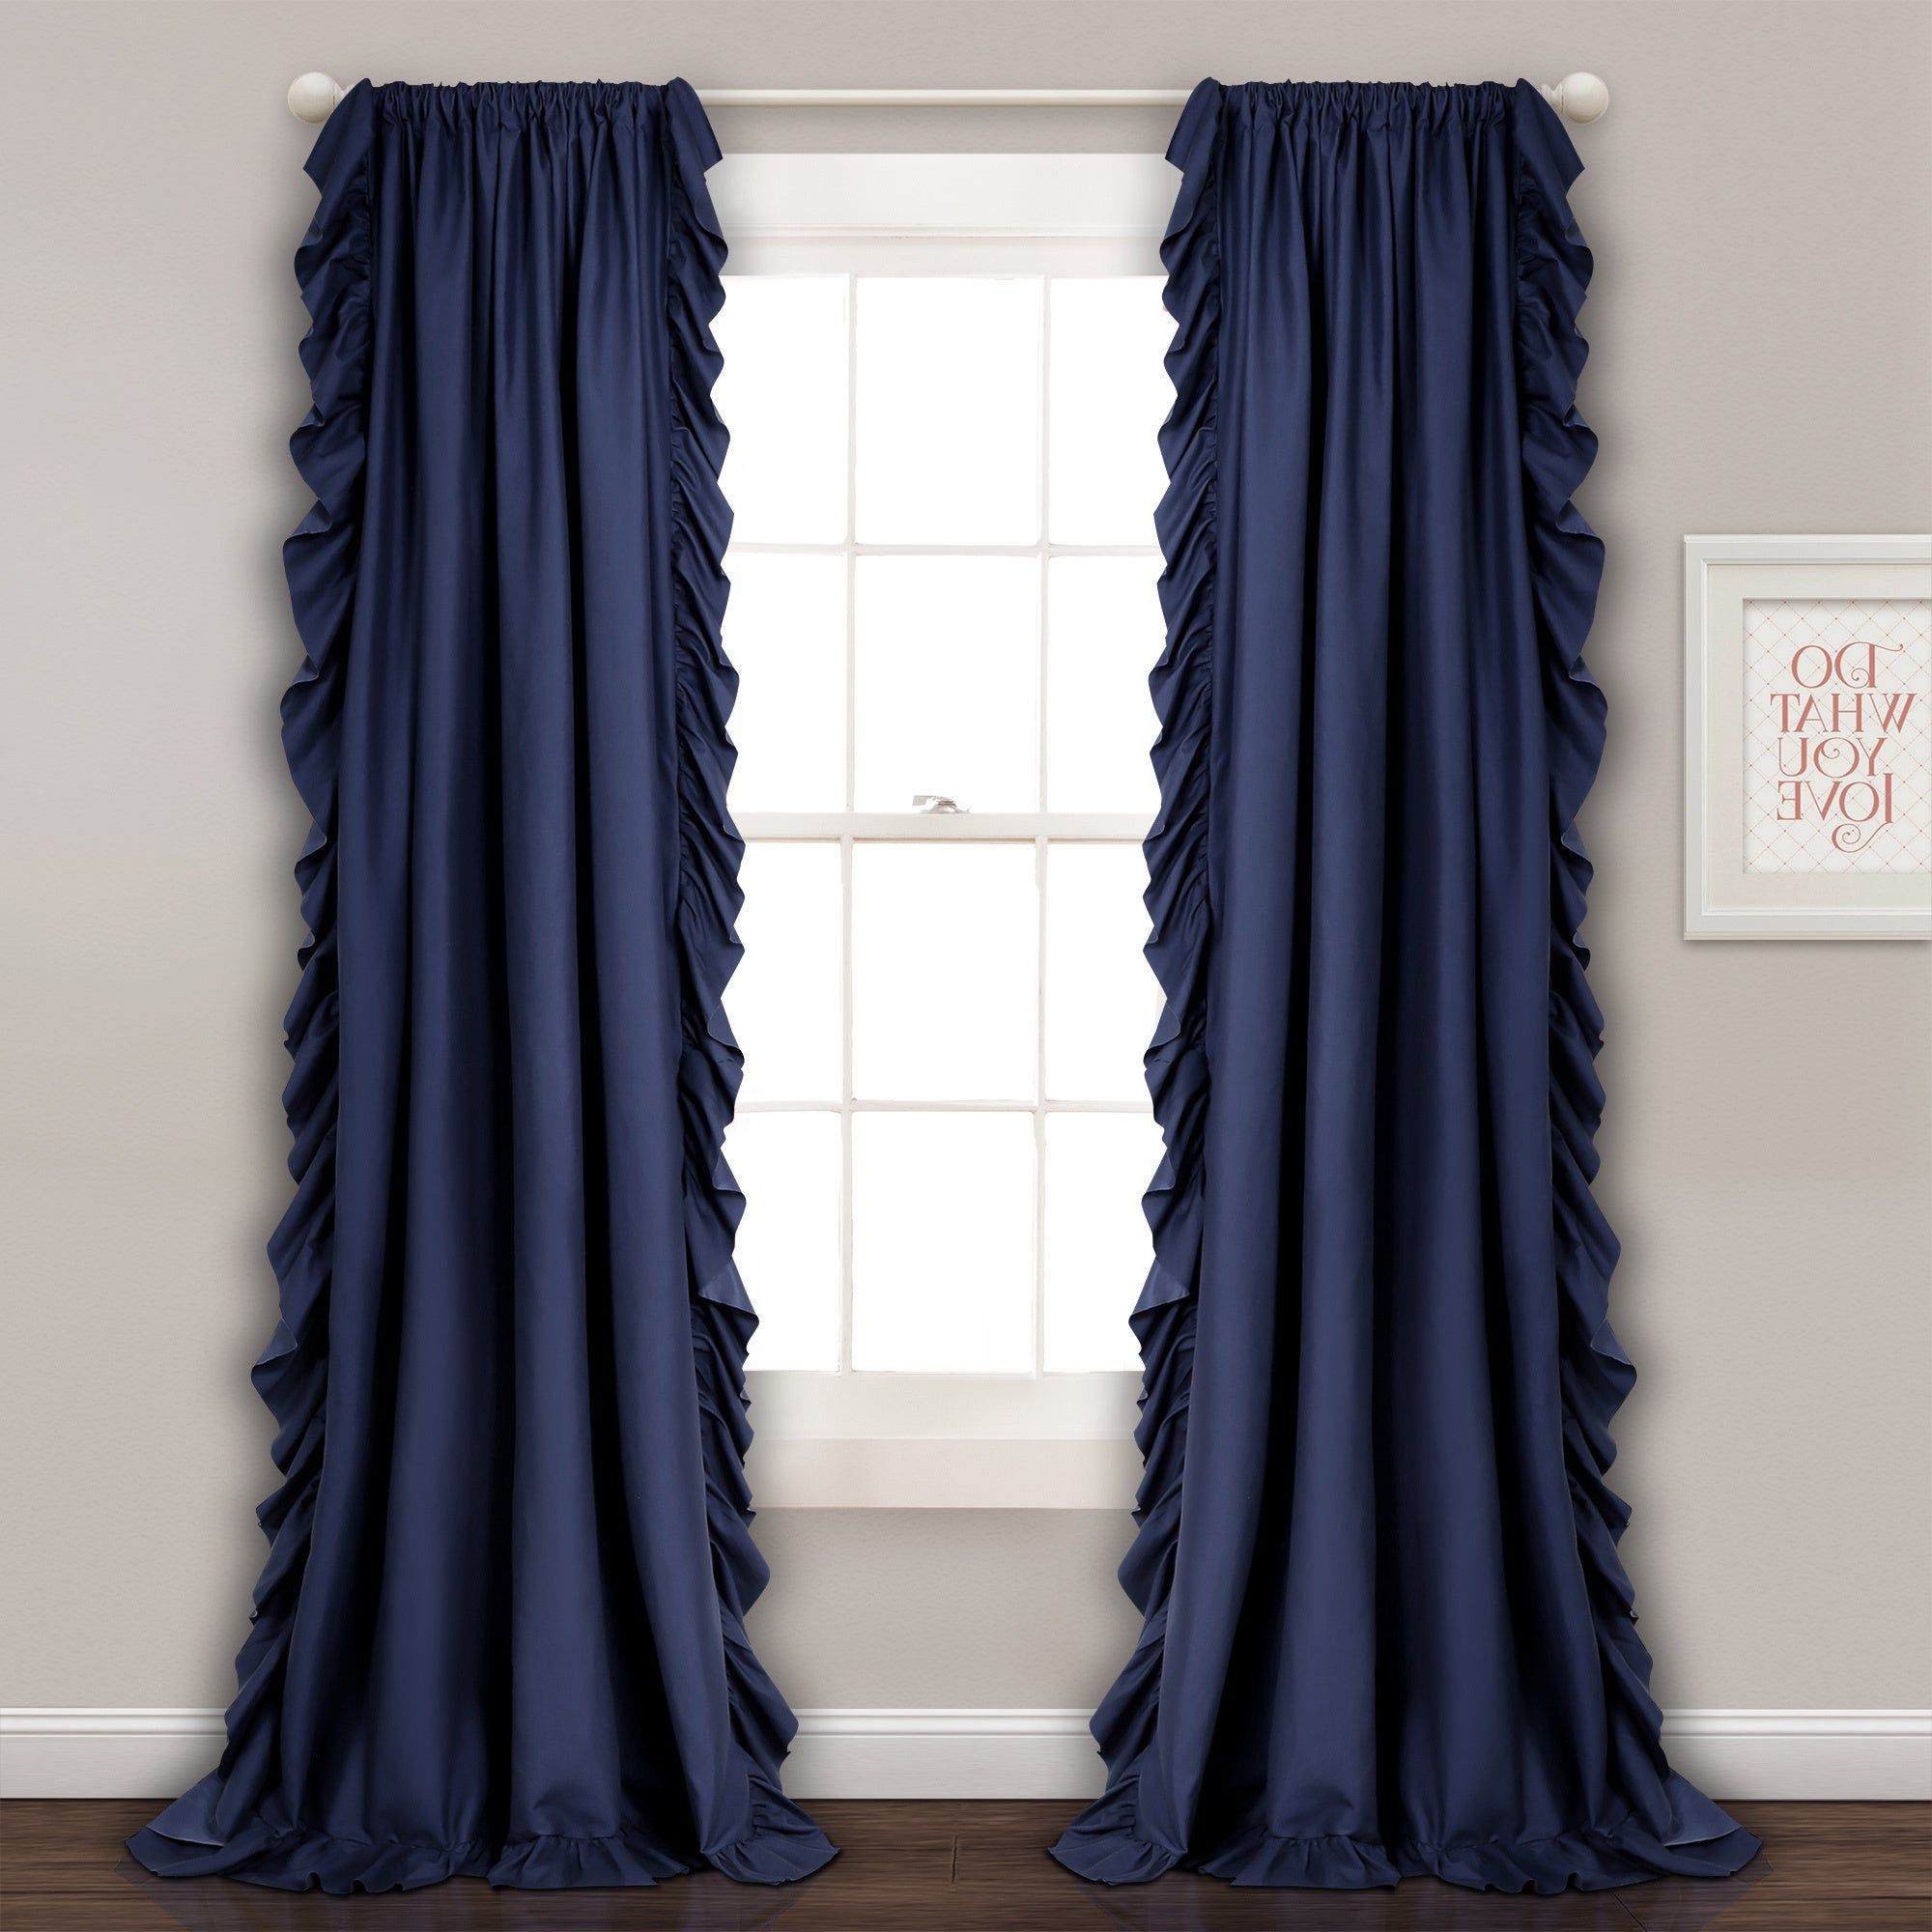 2020 The Gray Barn Gila Curtain Panel Pair In The Gray Barn Gila Curtain Panel Pairs (View 4 of 20)